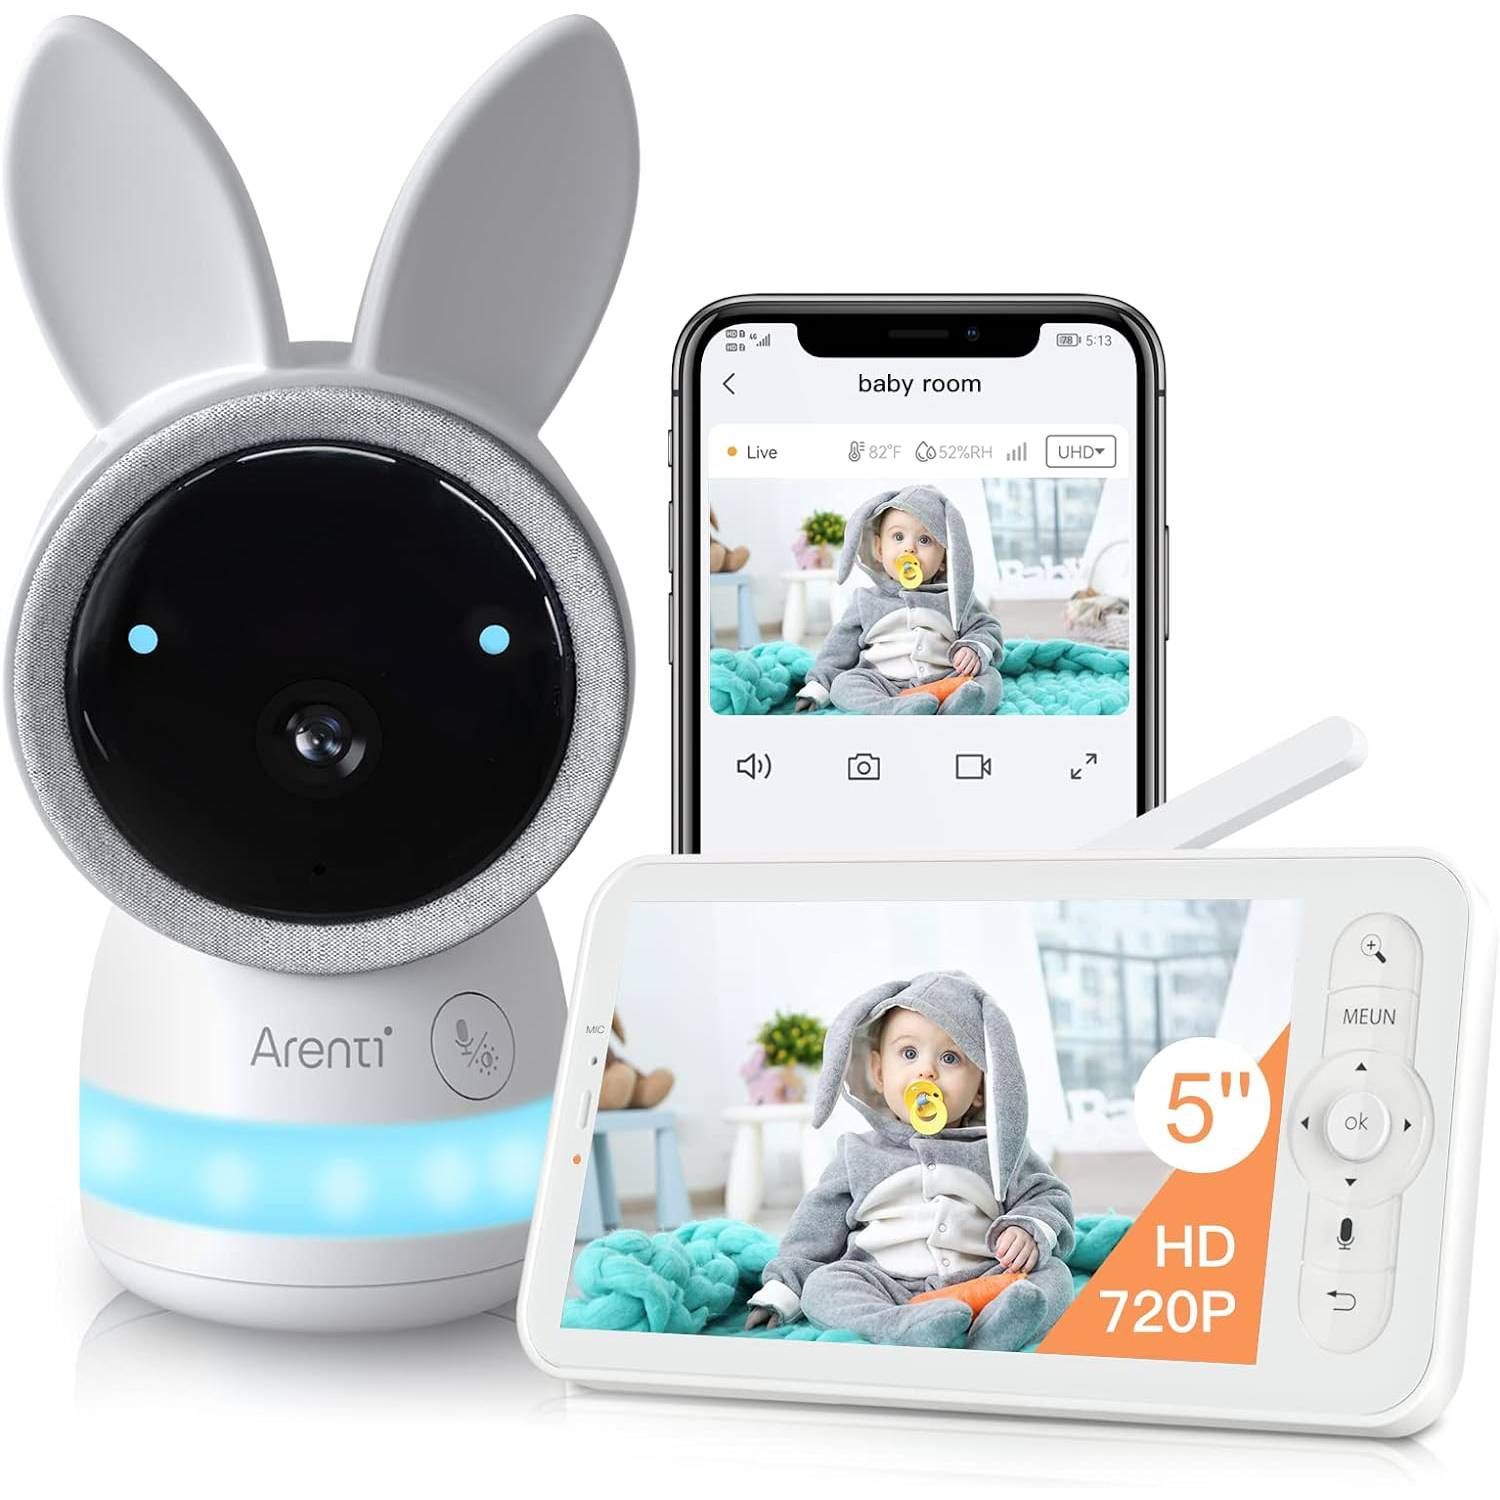 ARENTI Video Baby Monitor, along with a smartphone showing the app